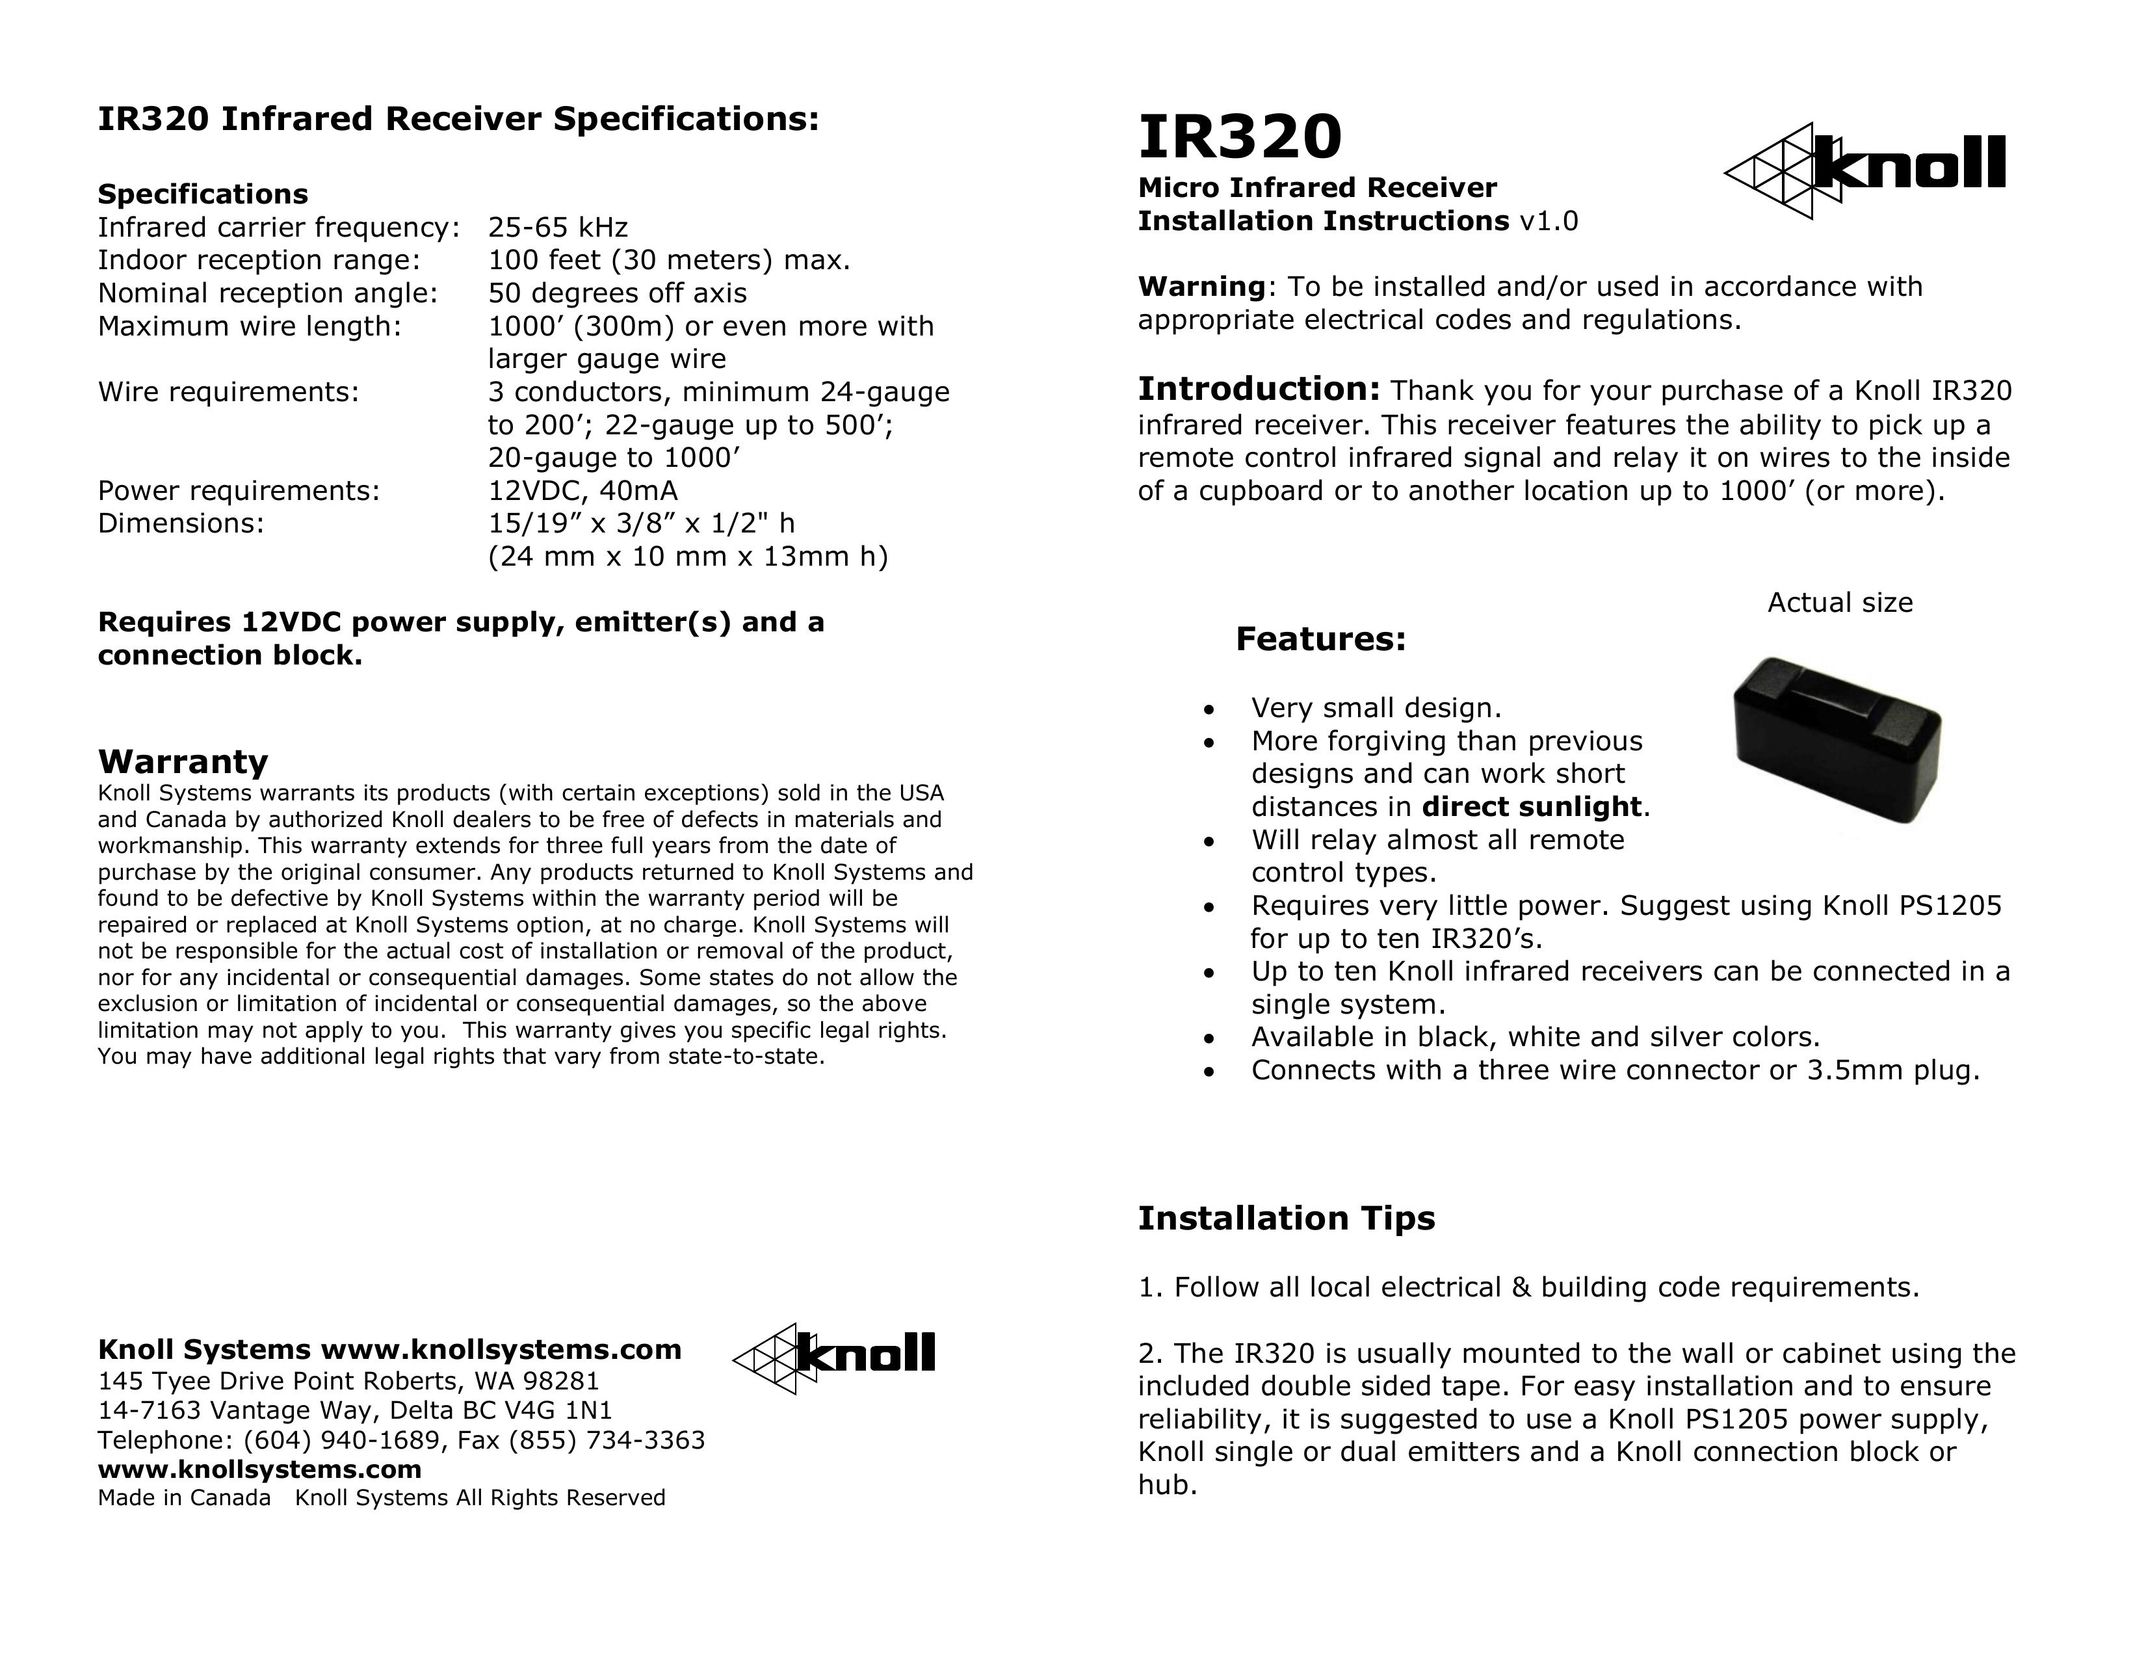 Knoll Systems IR320 Stereo Receiver User Manual